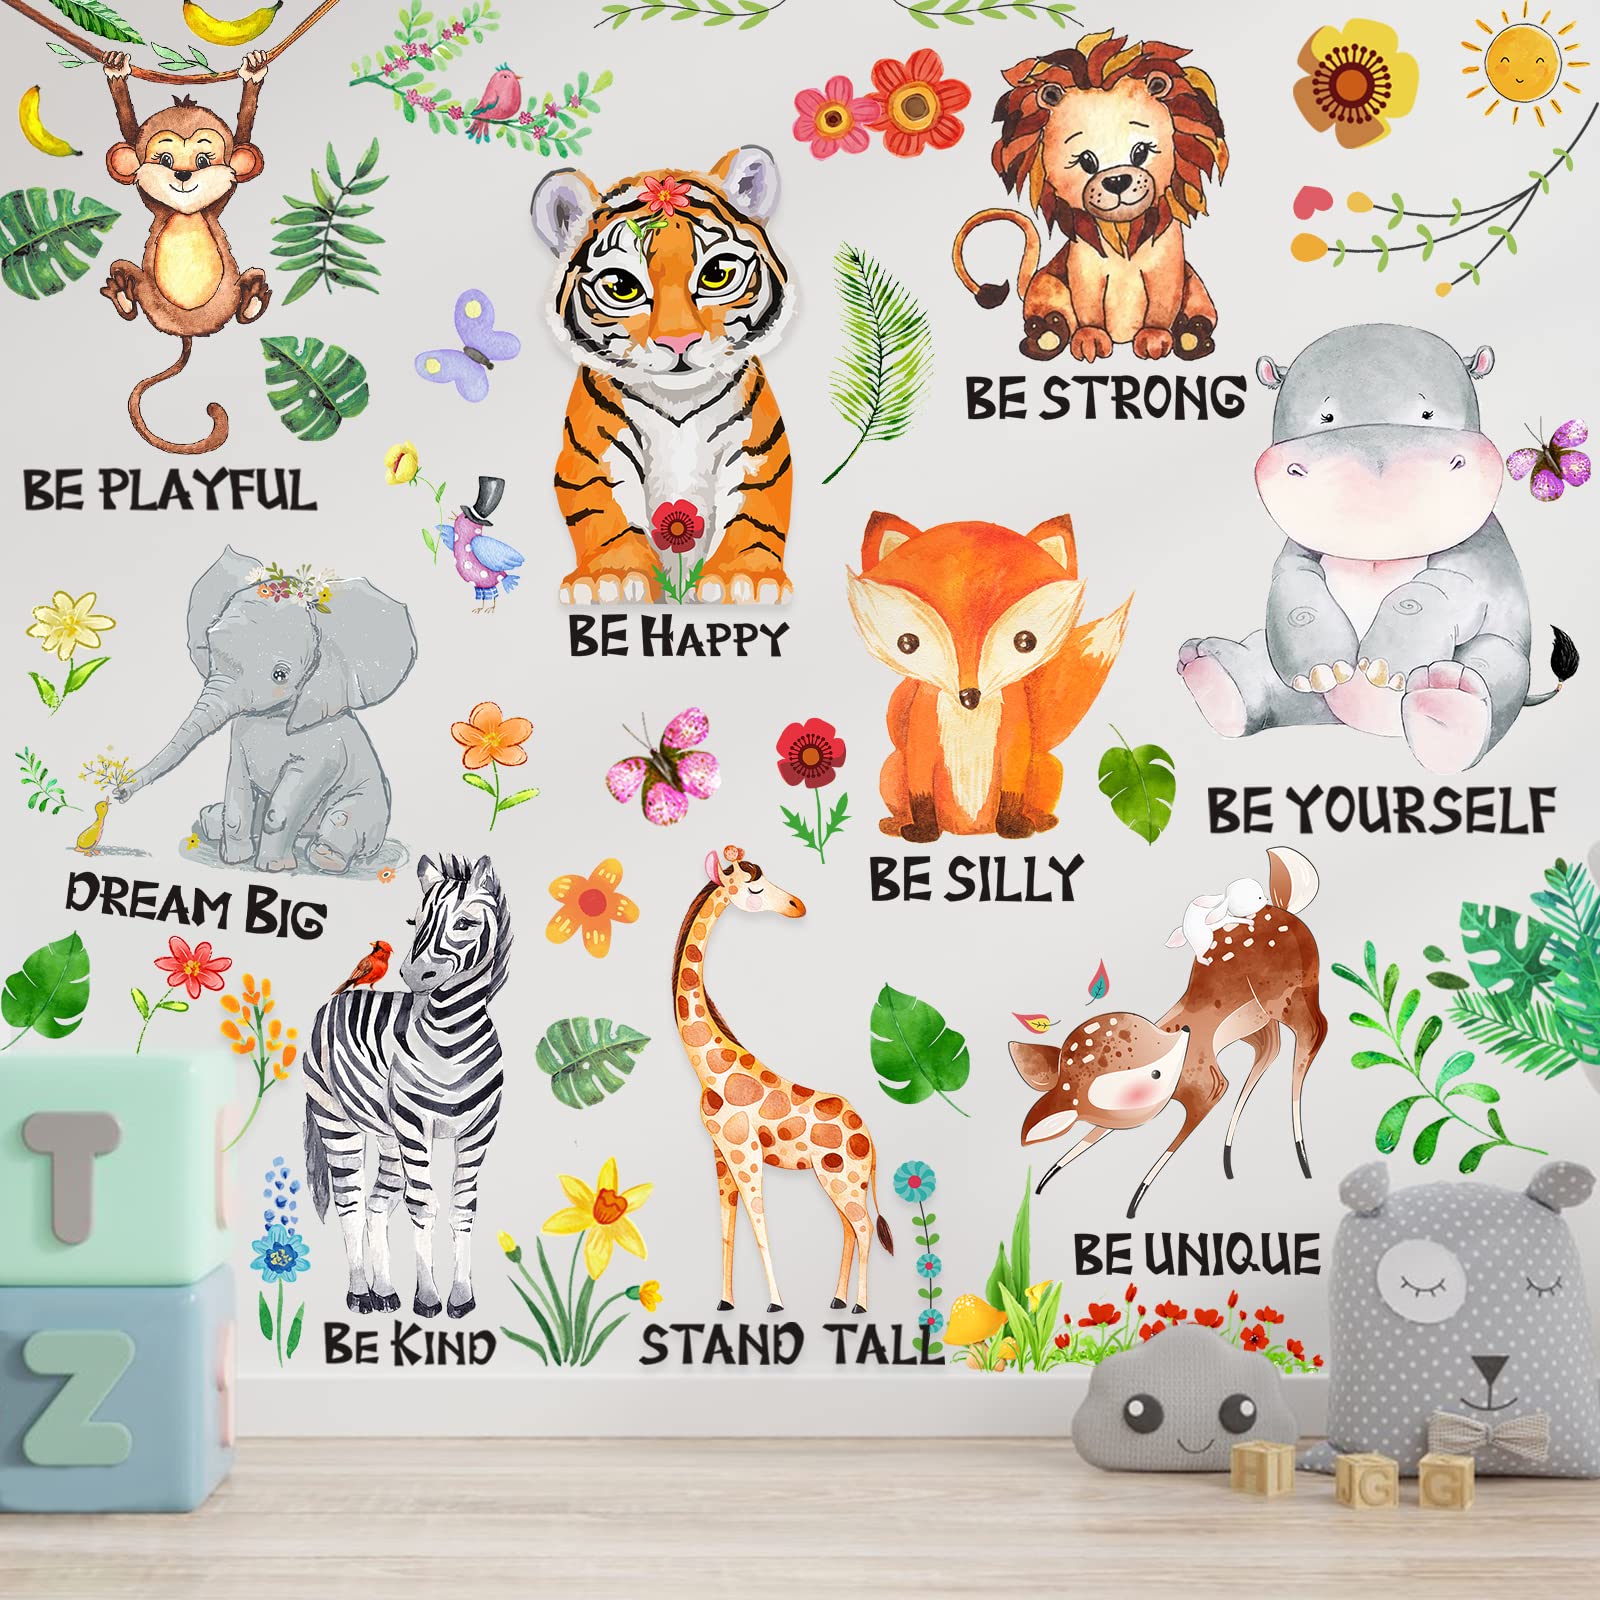 9 Pcs Jungle Animal Wall Decals, Removable Woodland Safari Animal Wall Sticker with Inspirational Quotes for Baby Boys Girls Infant Children Kids Nursery Living Room Bedroom Classroom Playroom Decor